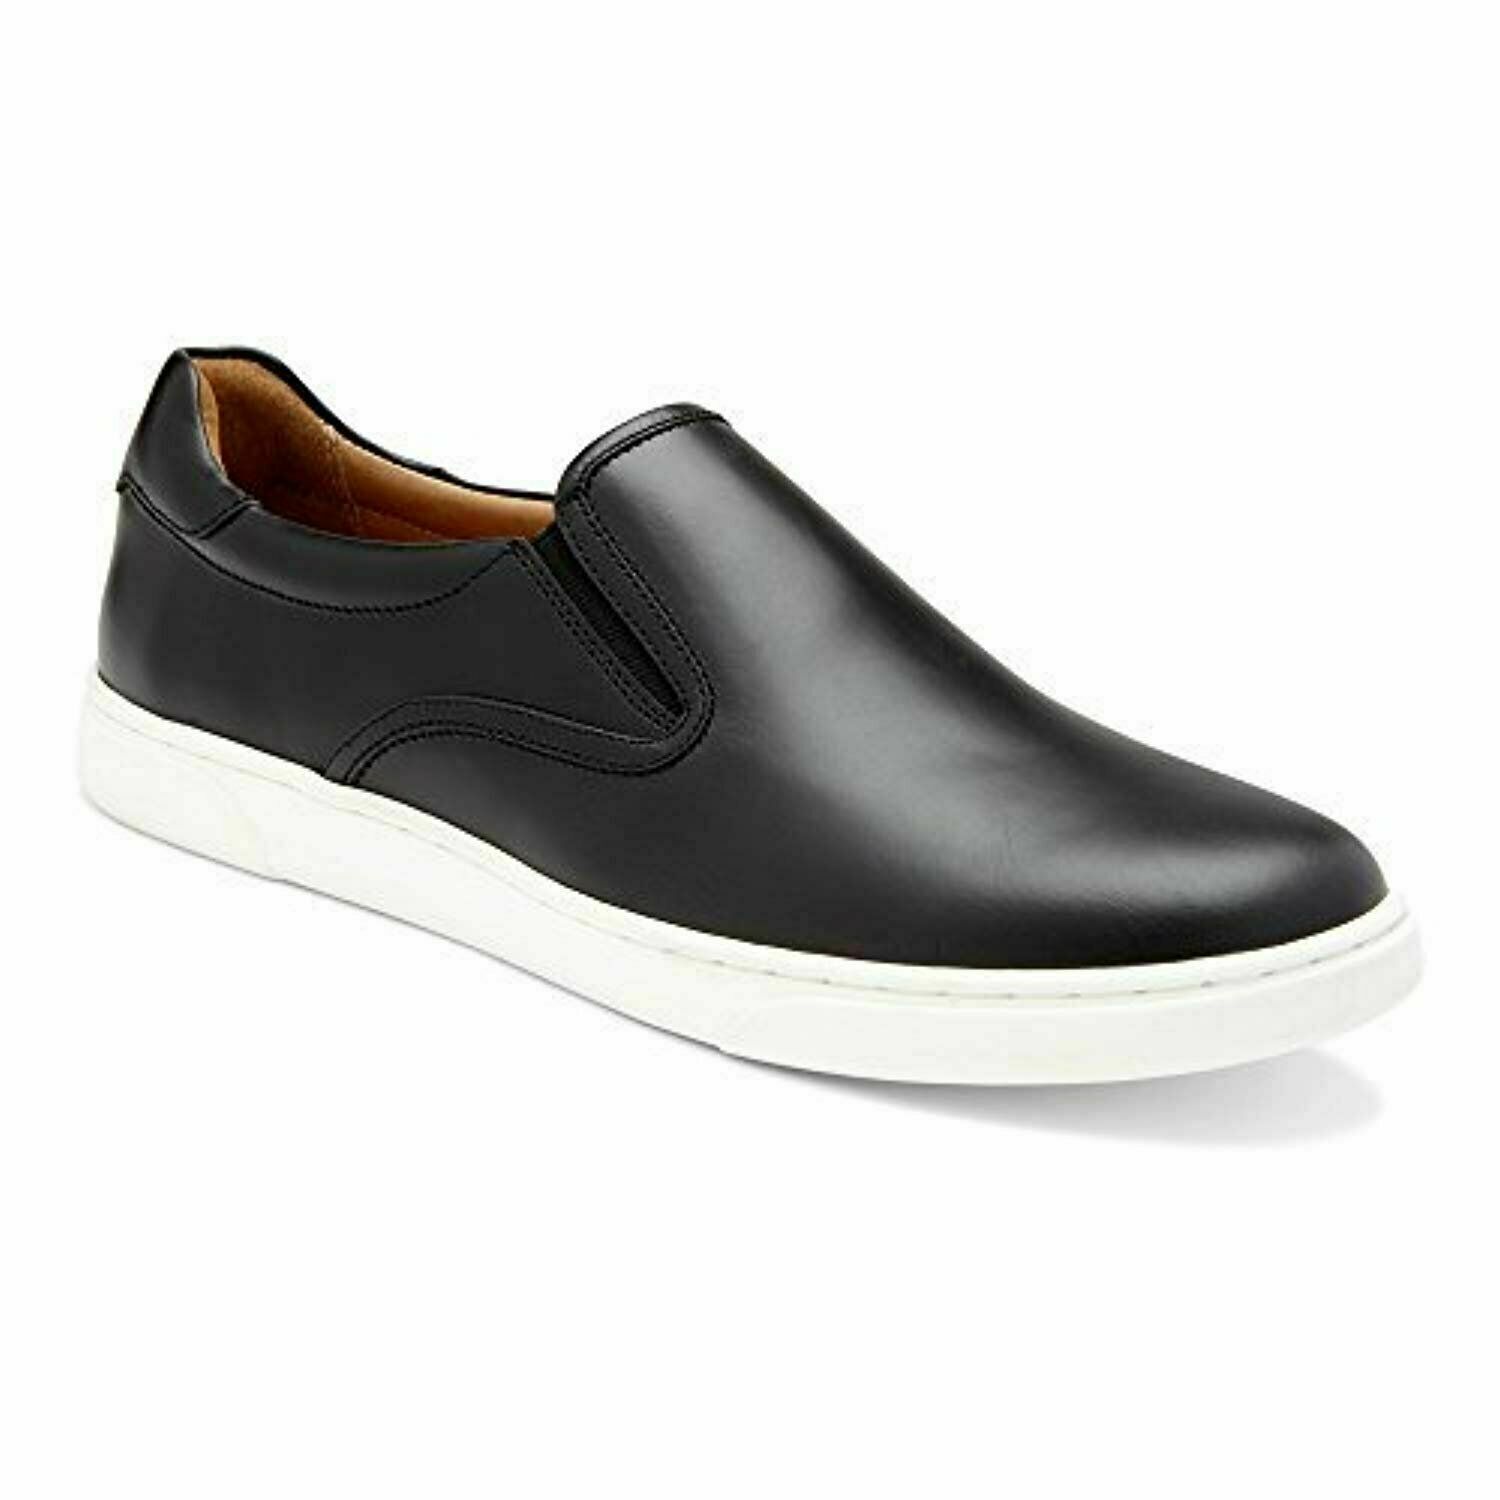 Vionic Mott Brody Black Leather Men's Casual Slip-on Arch Support Orthotic Shoes